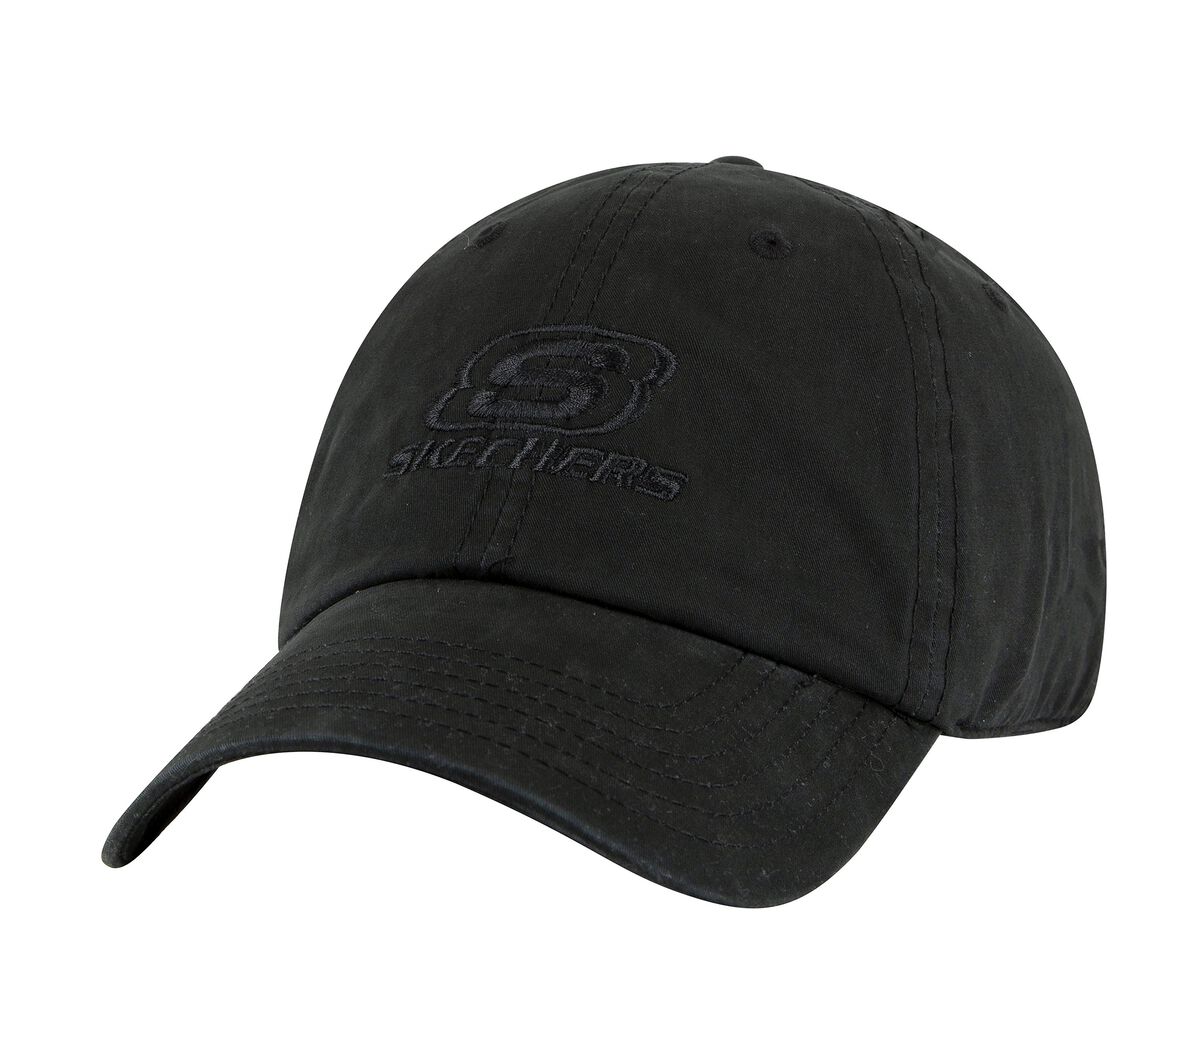 Buy Skechers GOSHIELD QUILTED BASEBALL HAT